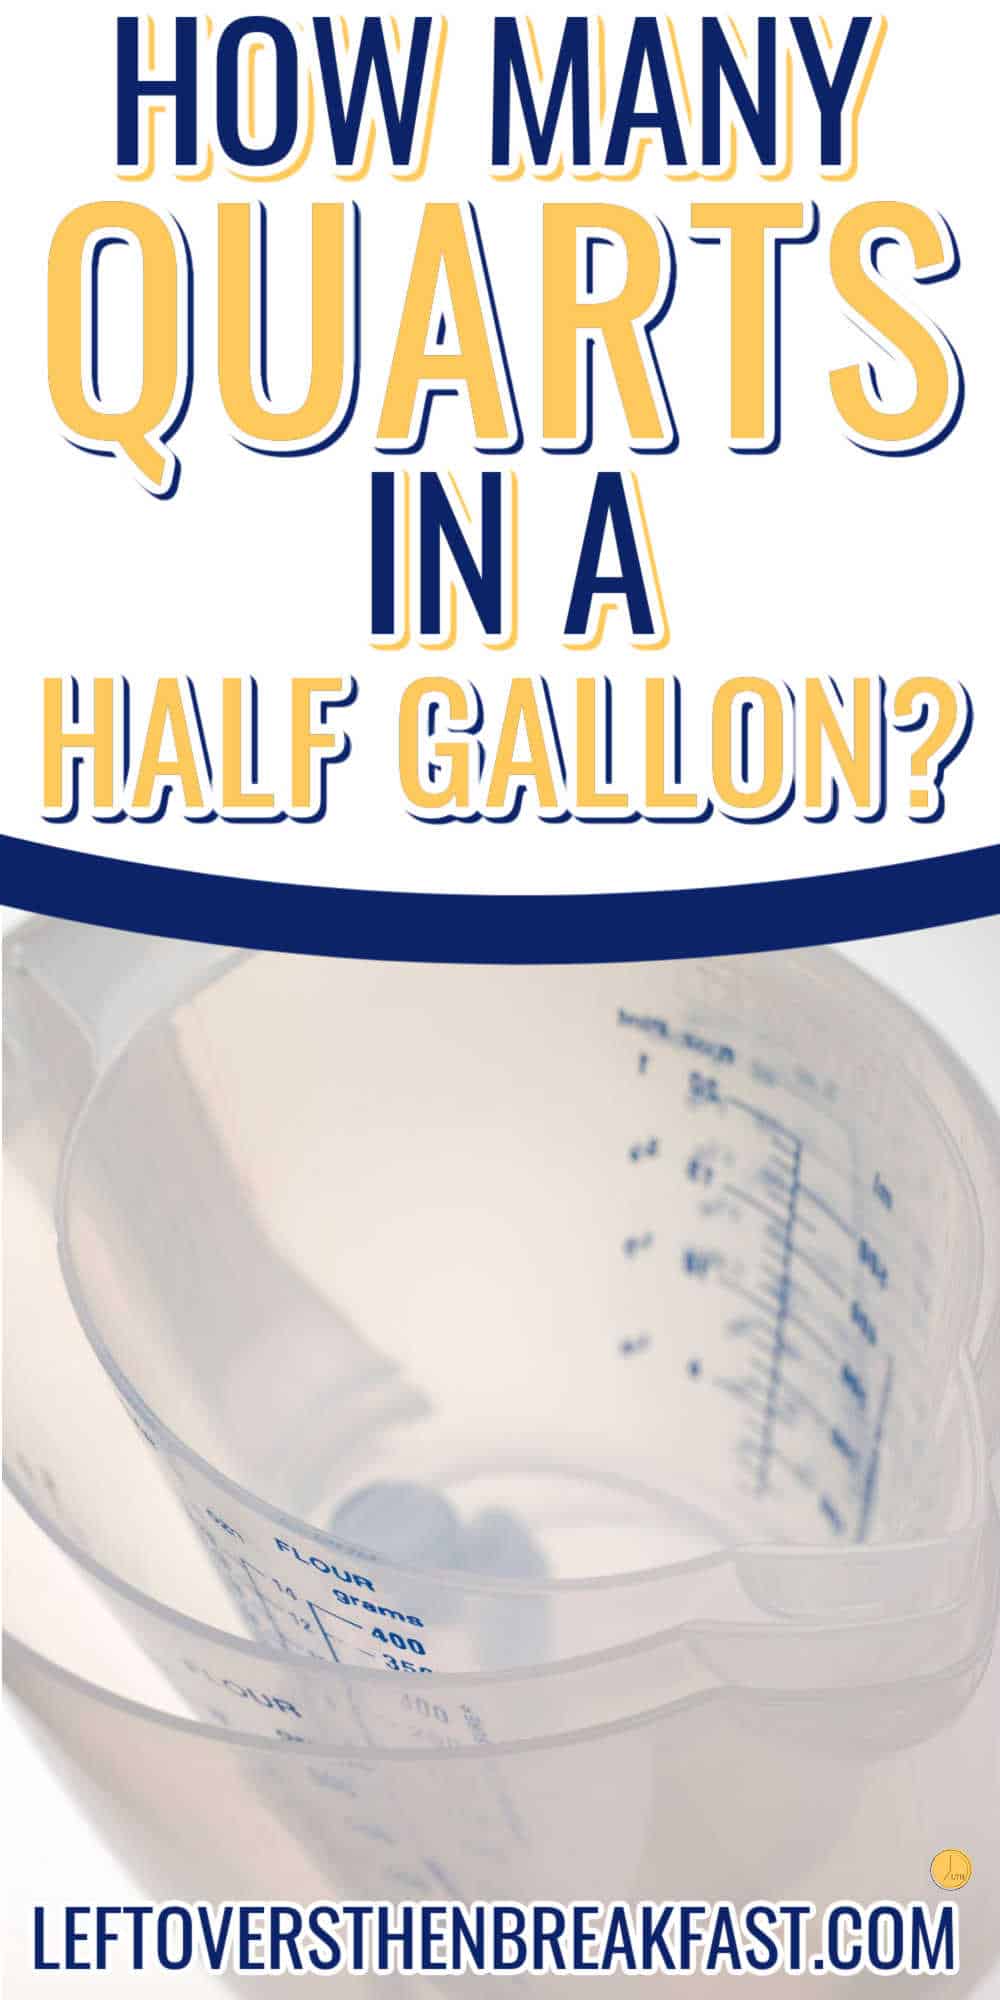 measuring cups with white banner and text "how many quarts in a half gallon"